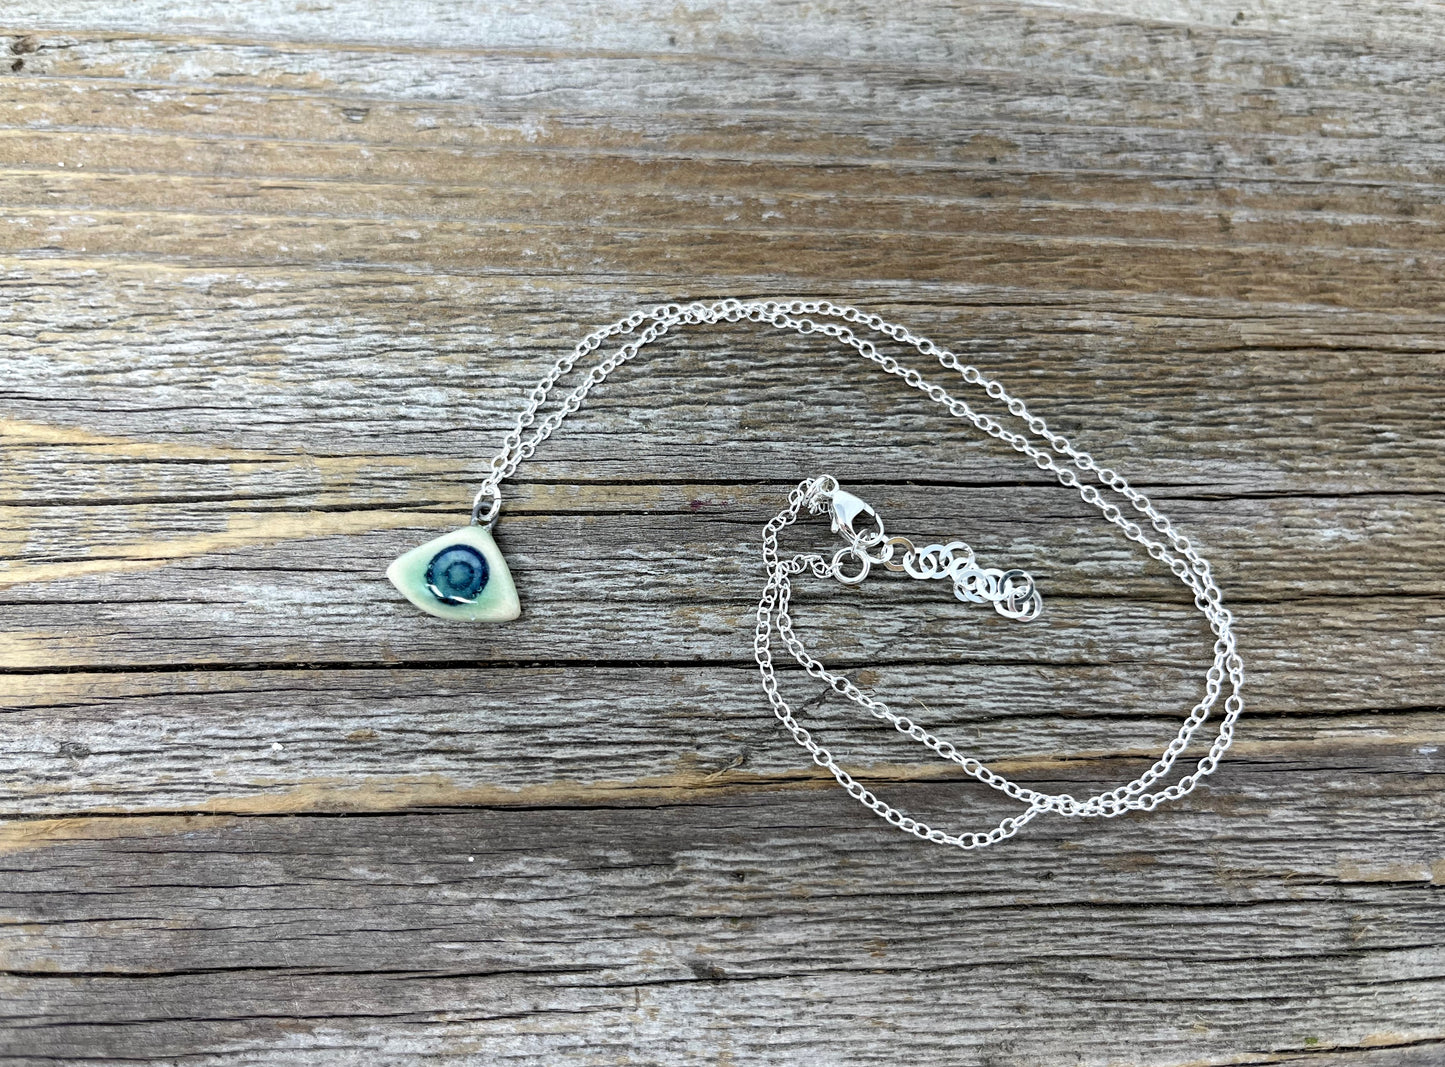 Small Fan Necklace in Blue and Green